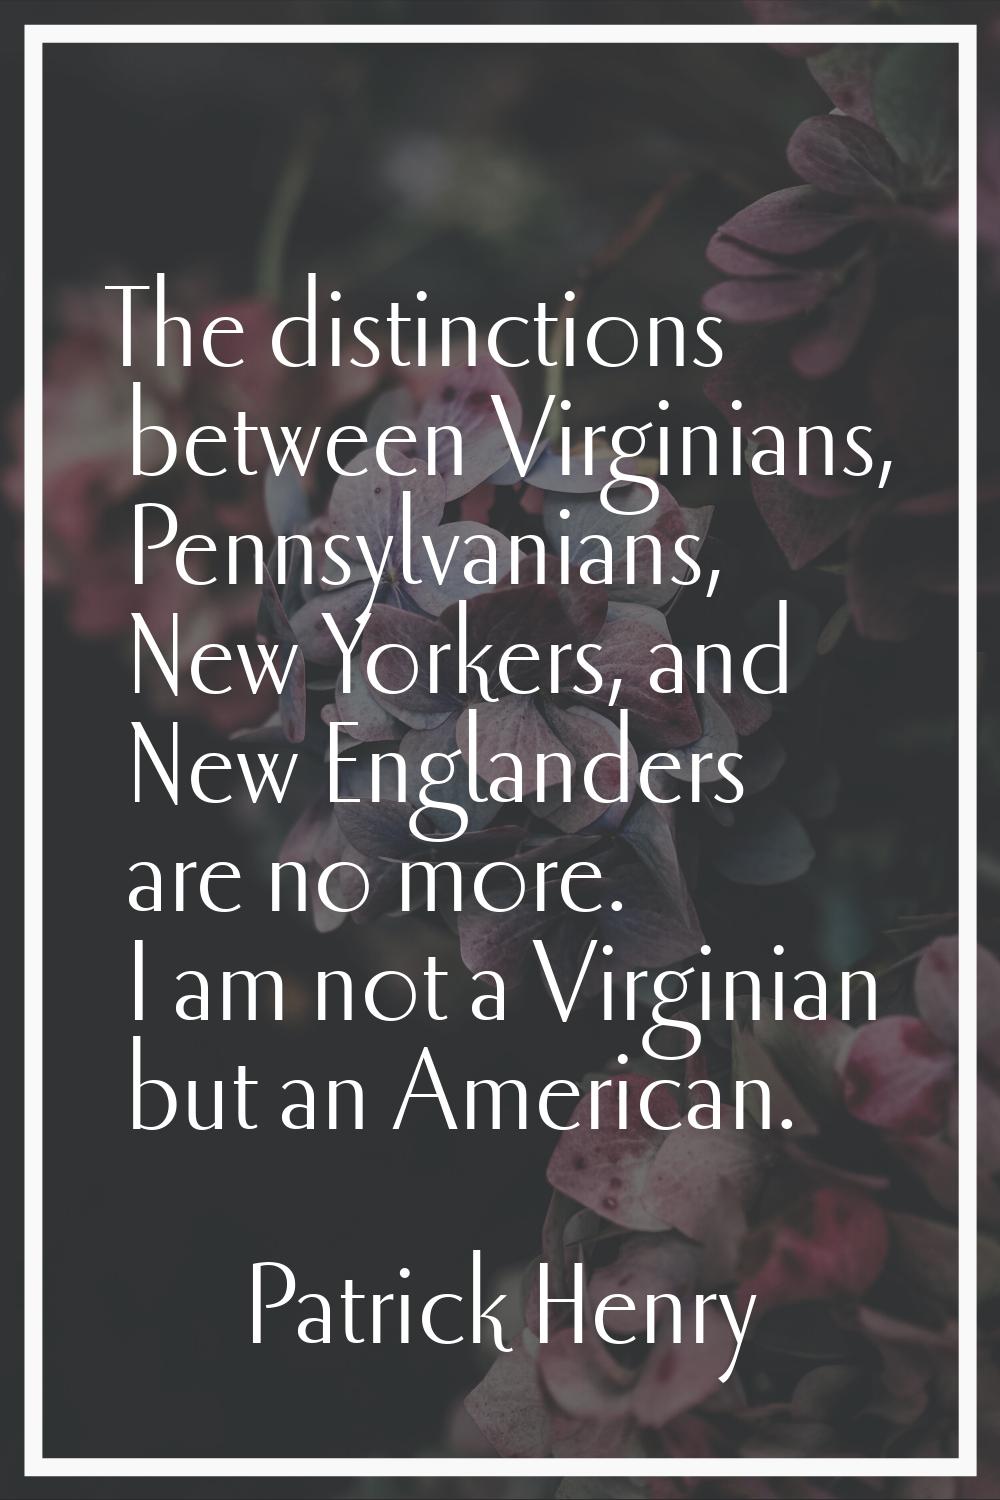 The distinctions between Virginians, Pennsylvanians, New Yorkers, and New Englanders are no more. I